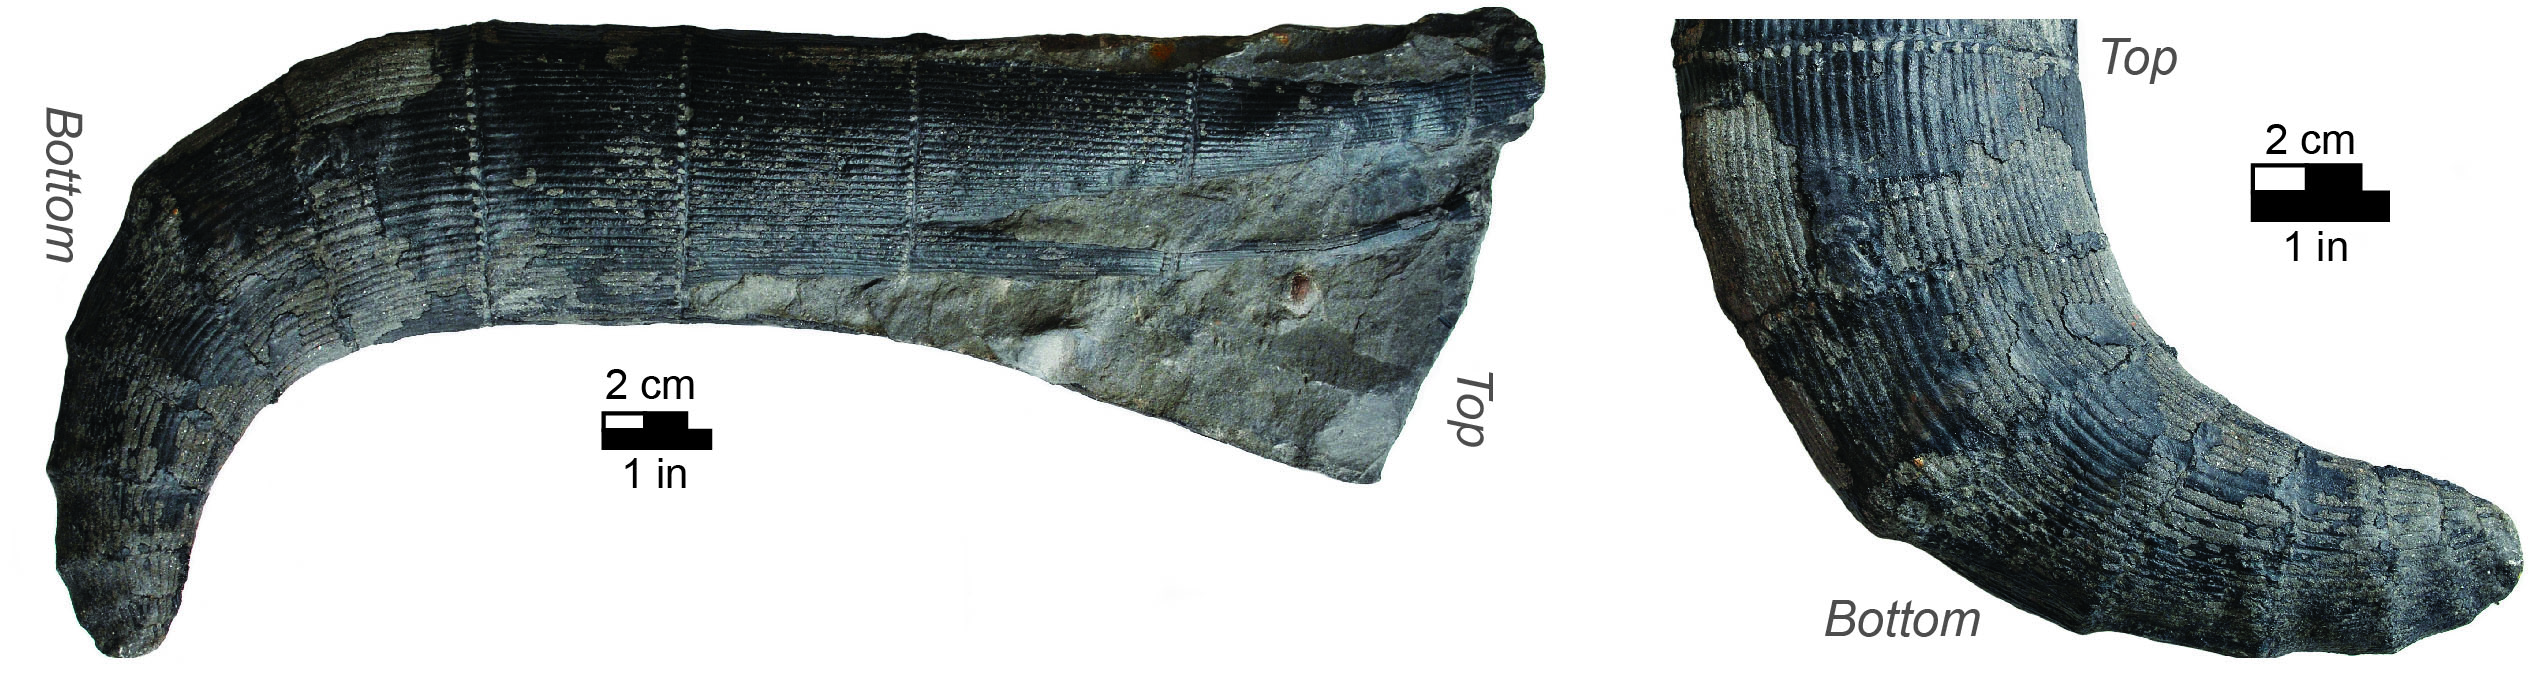 Fossil of the month: Calamites